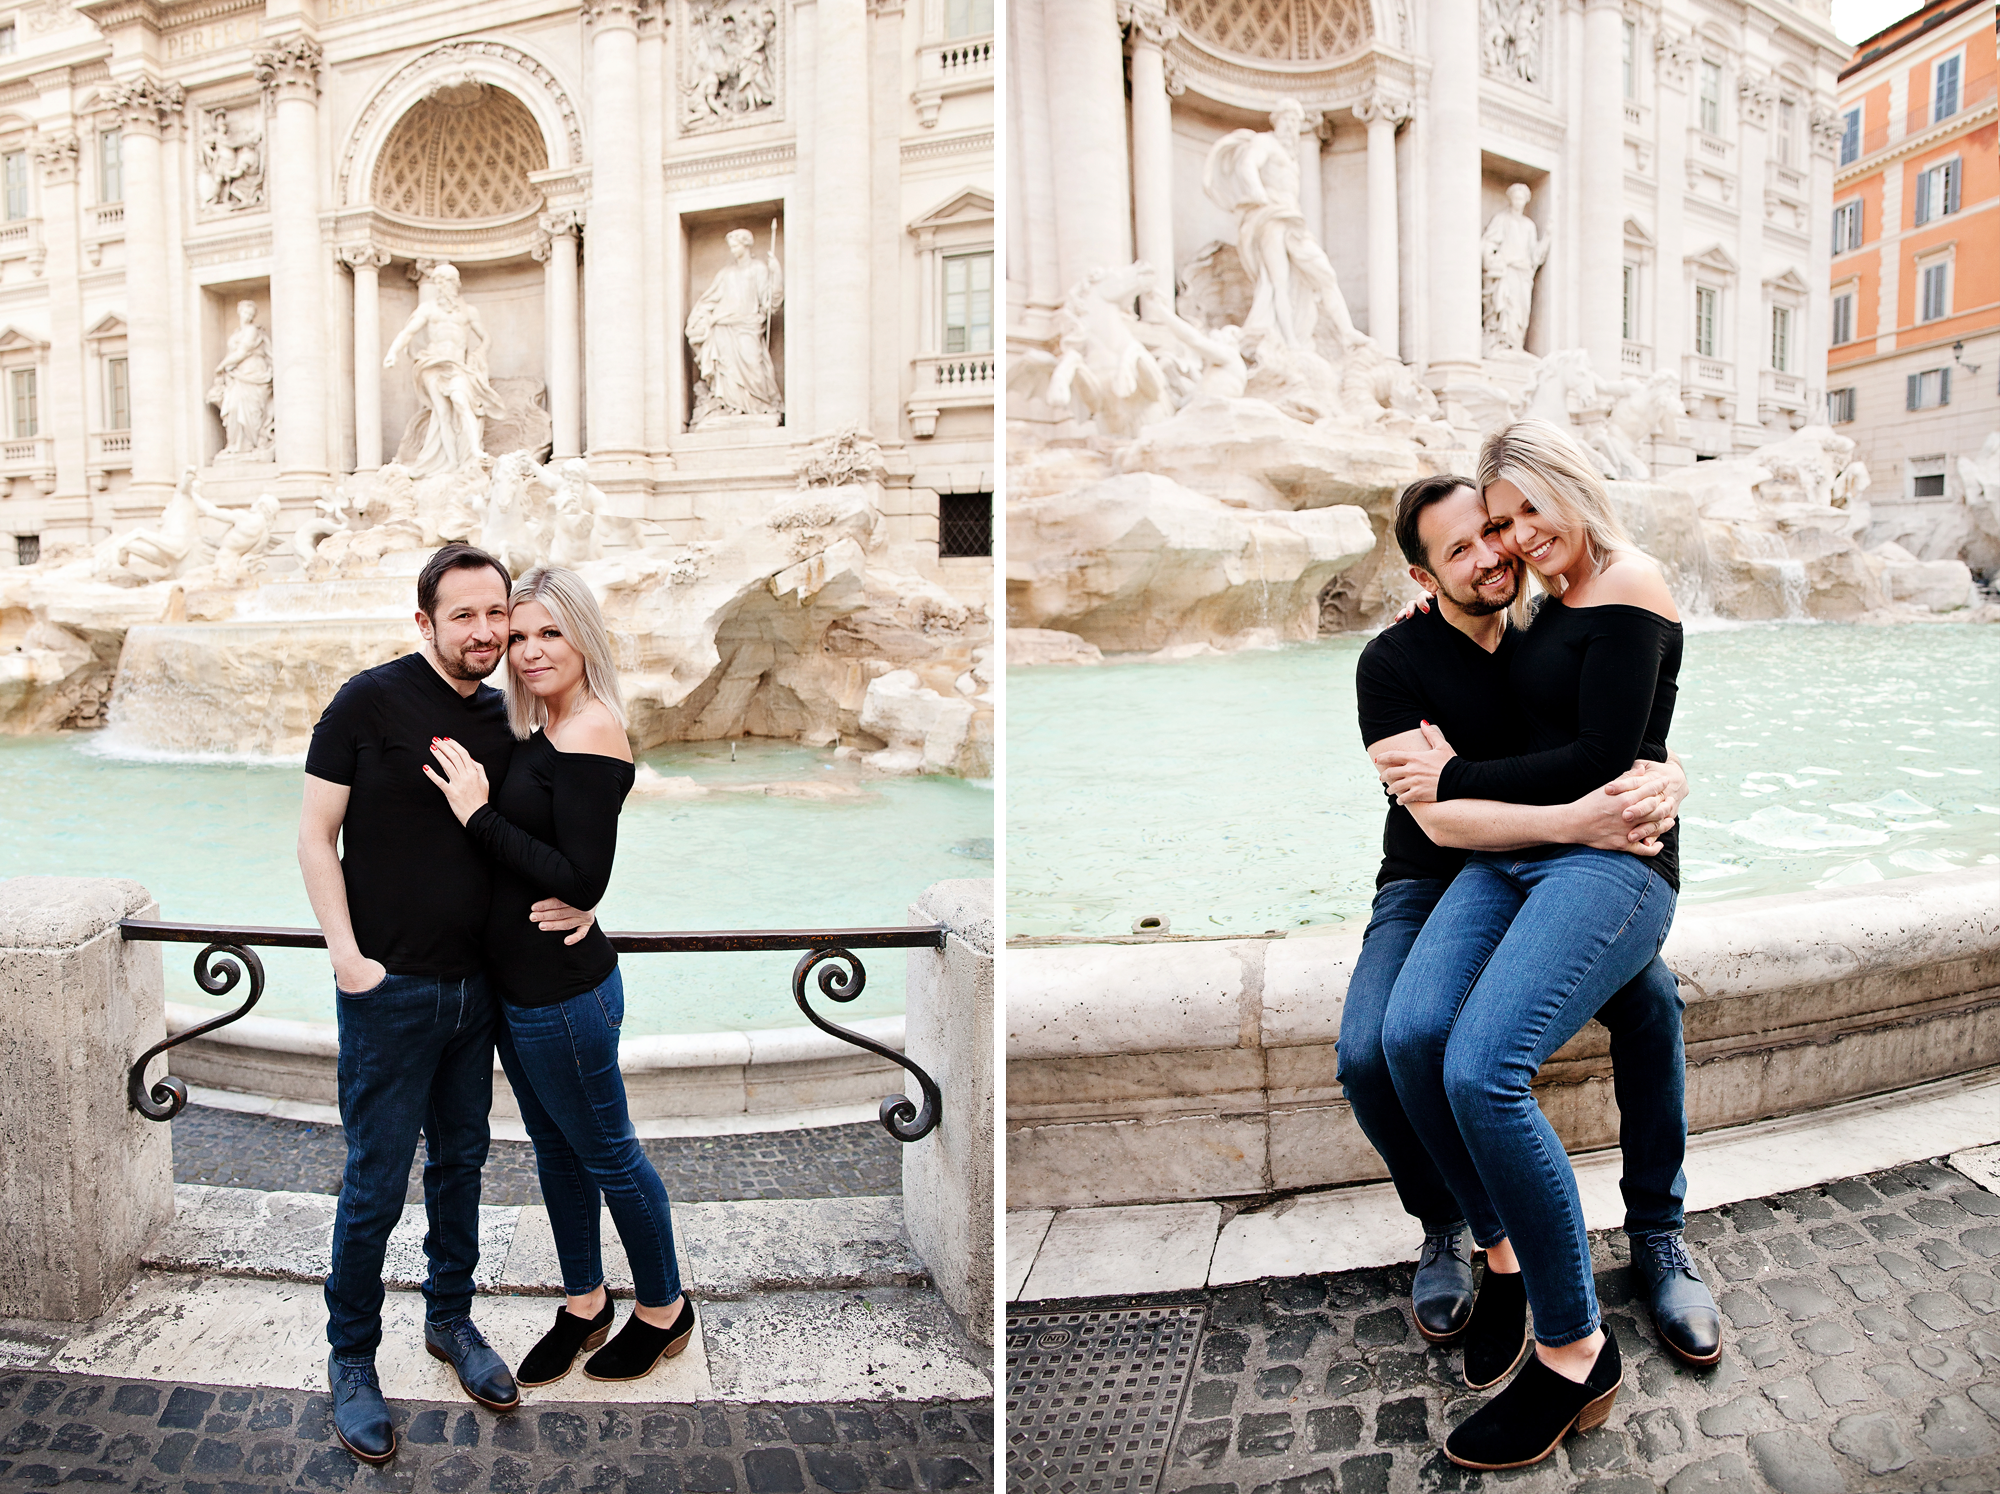 Honeymoon, vacation, family, engagement, maternity, wedding, love story individual and solo photoshoots in Rome, Italy by photographer Tricia Anne Photography | Rome Photographer, vacation, Pantheon, Colosseum, Spanish Steps, Trevi Fountain, love story, photo shoot in rome, Rome Vacation Photographer, Rome engagement photo shoot, rome honeymoon, rome wedding, elopement in Rome, honeymoon photographer rome, engagement photo shoot, English speaking photographer in Rome